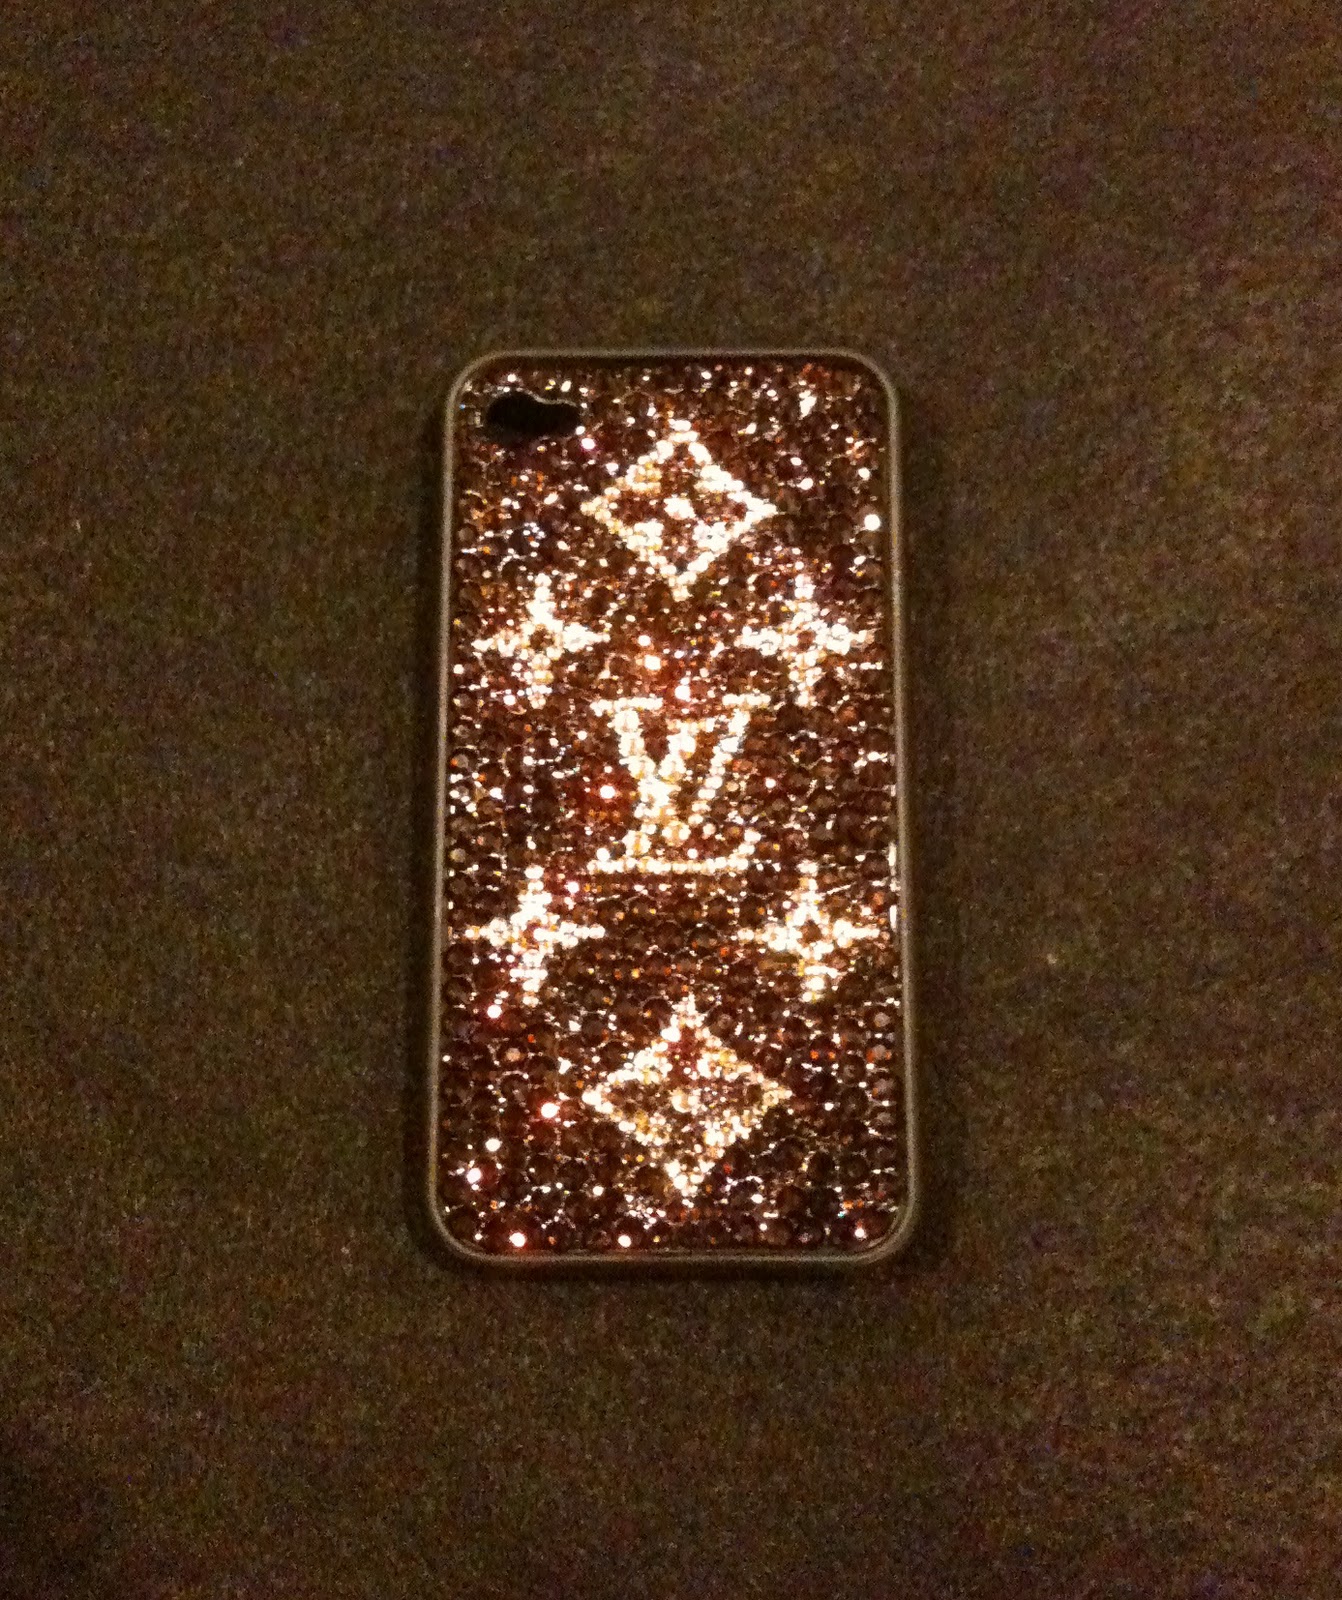 icedivadesigns: Louis Vuitton Inspired iPhone 4 Case